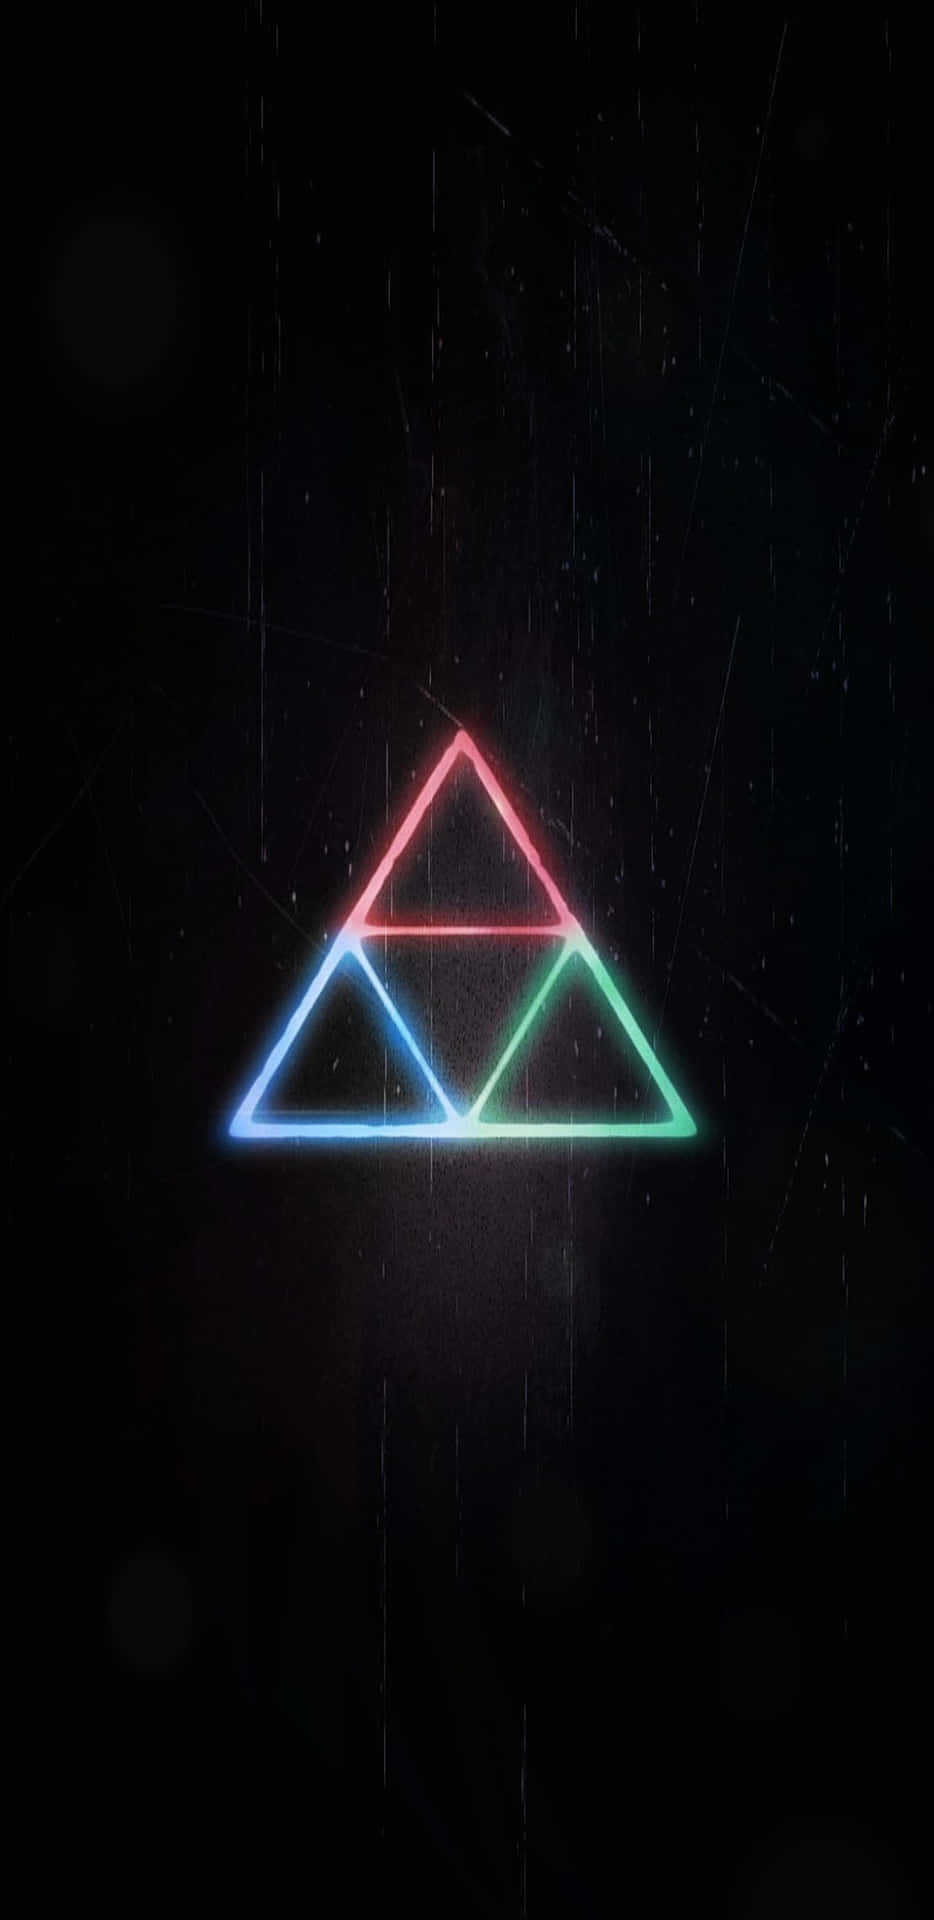 Image The Legendary Triforce